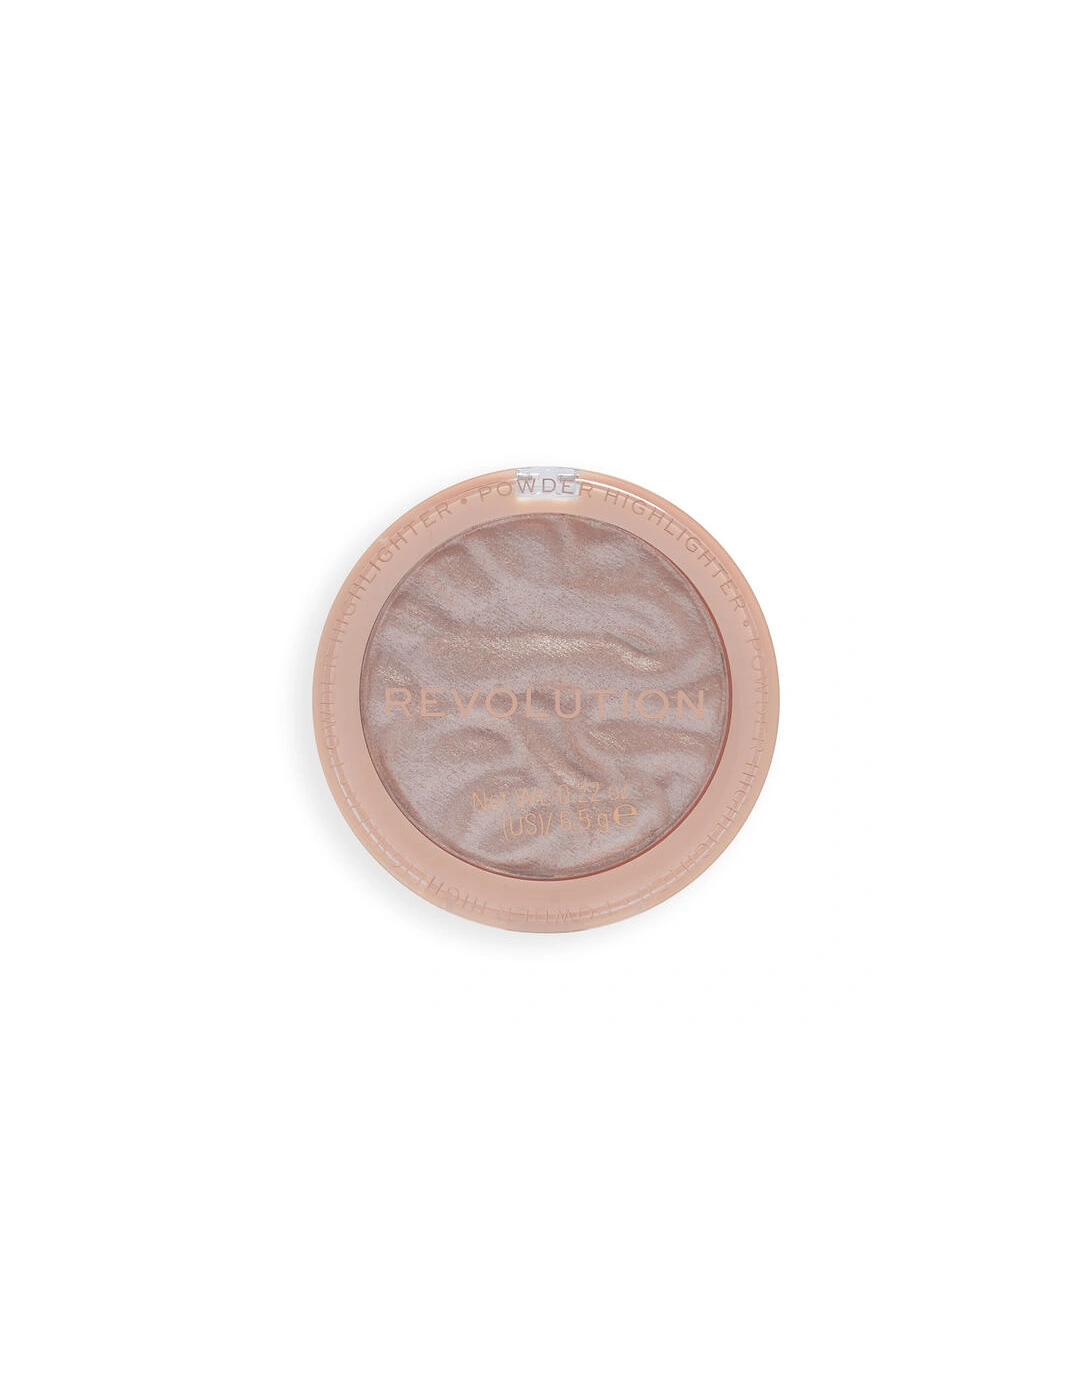 Makeup Reloaded Highlighter Dare to Divulge, 2 of 1